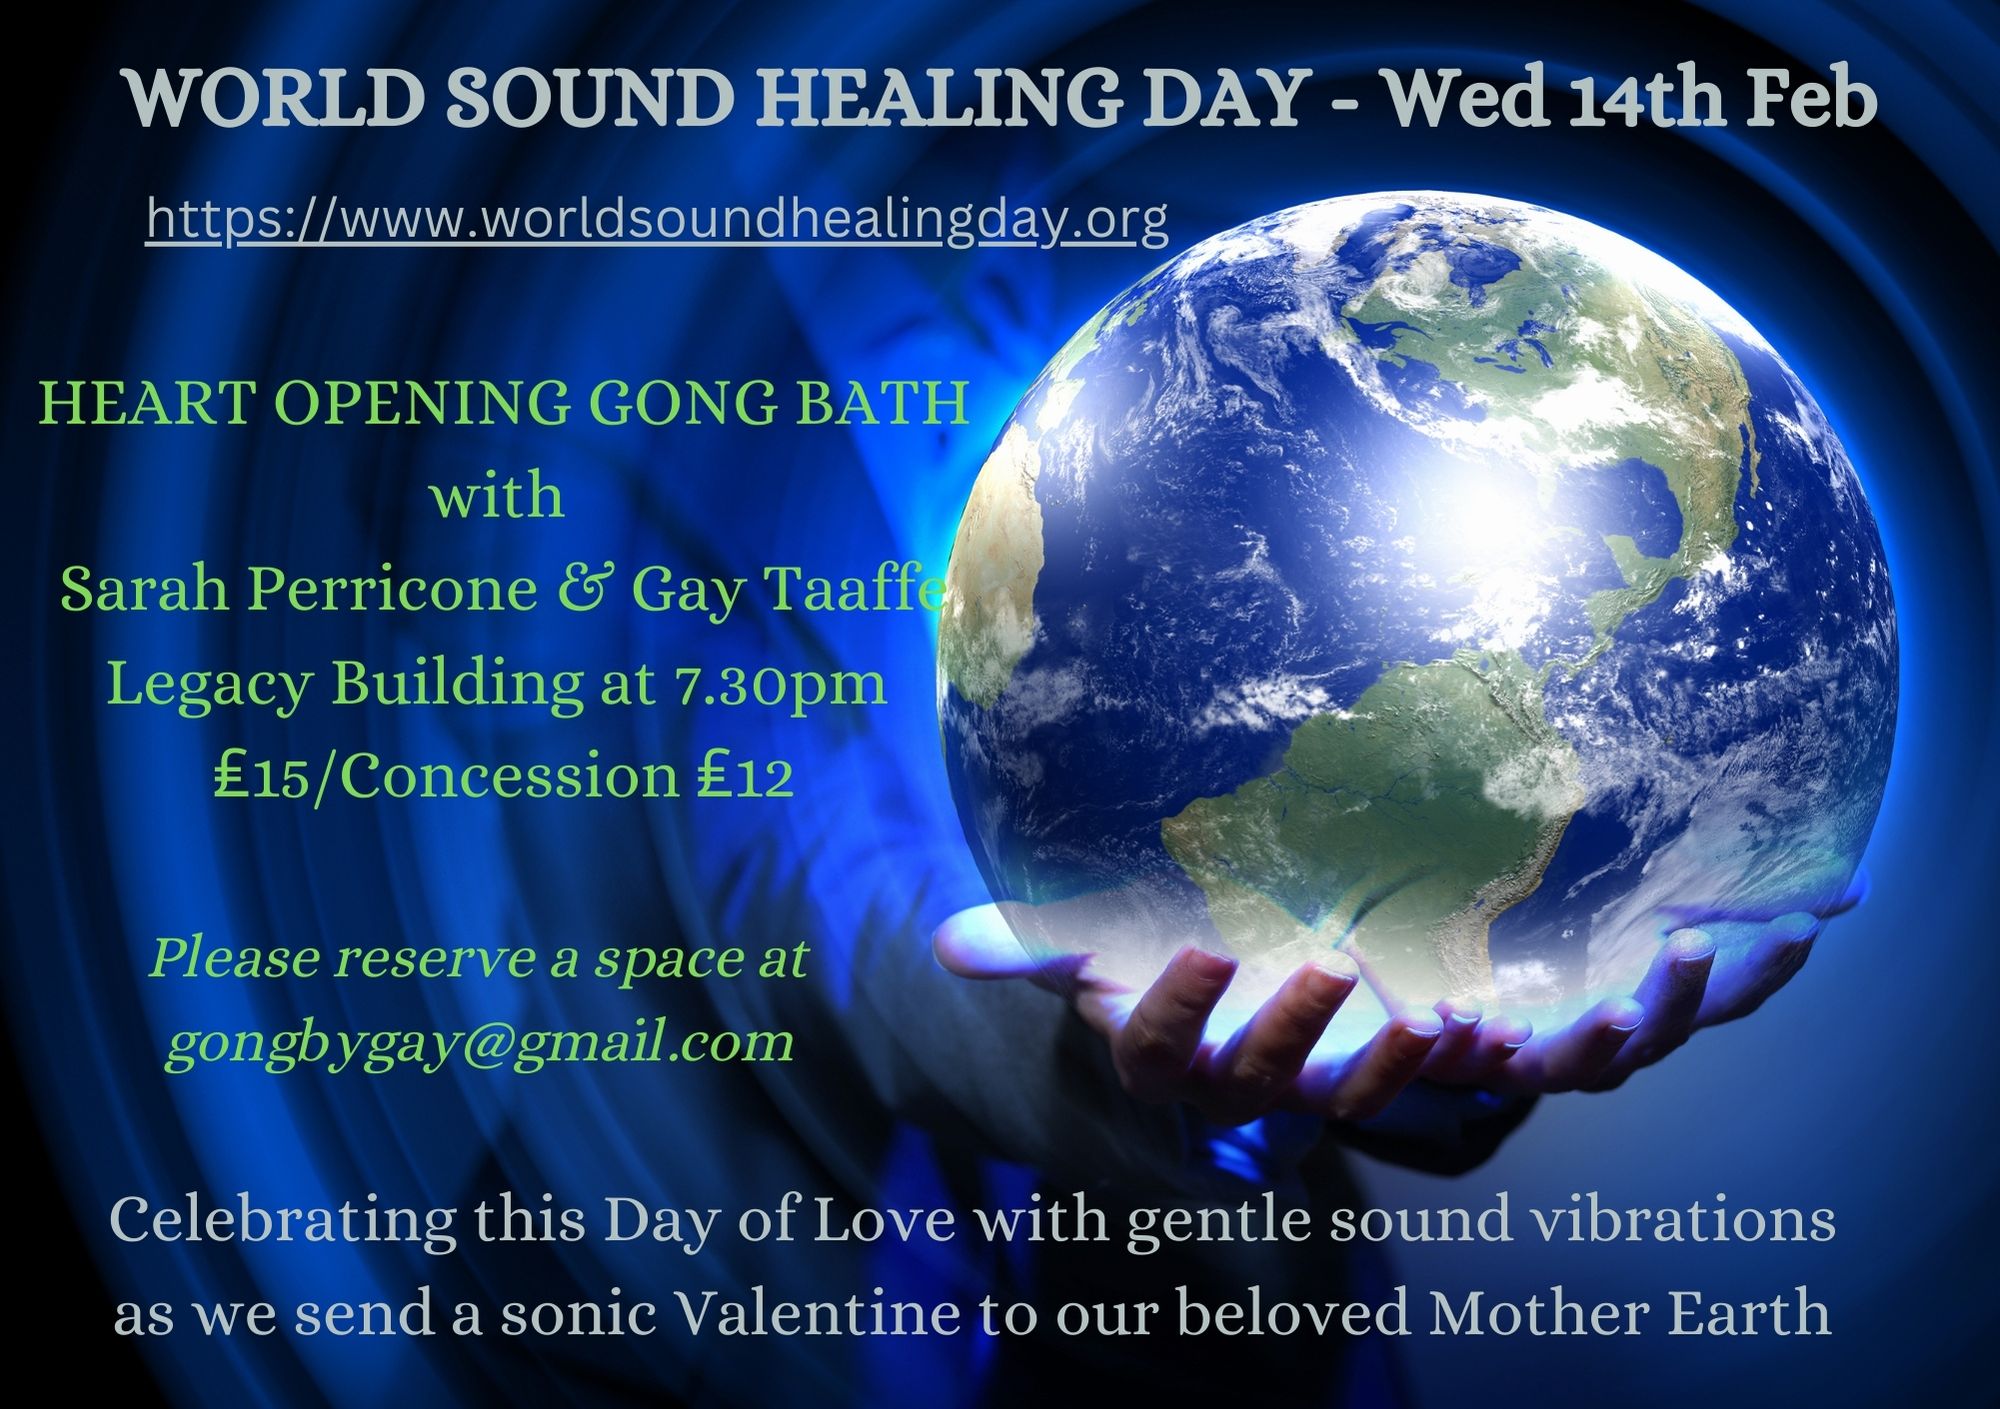 Heart Opening Gong Bath with Sarah Perricone & Gay Taaffe